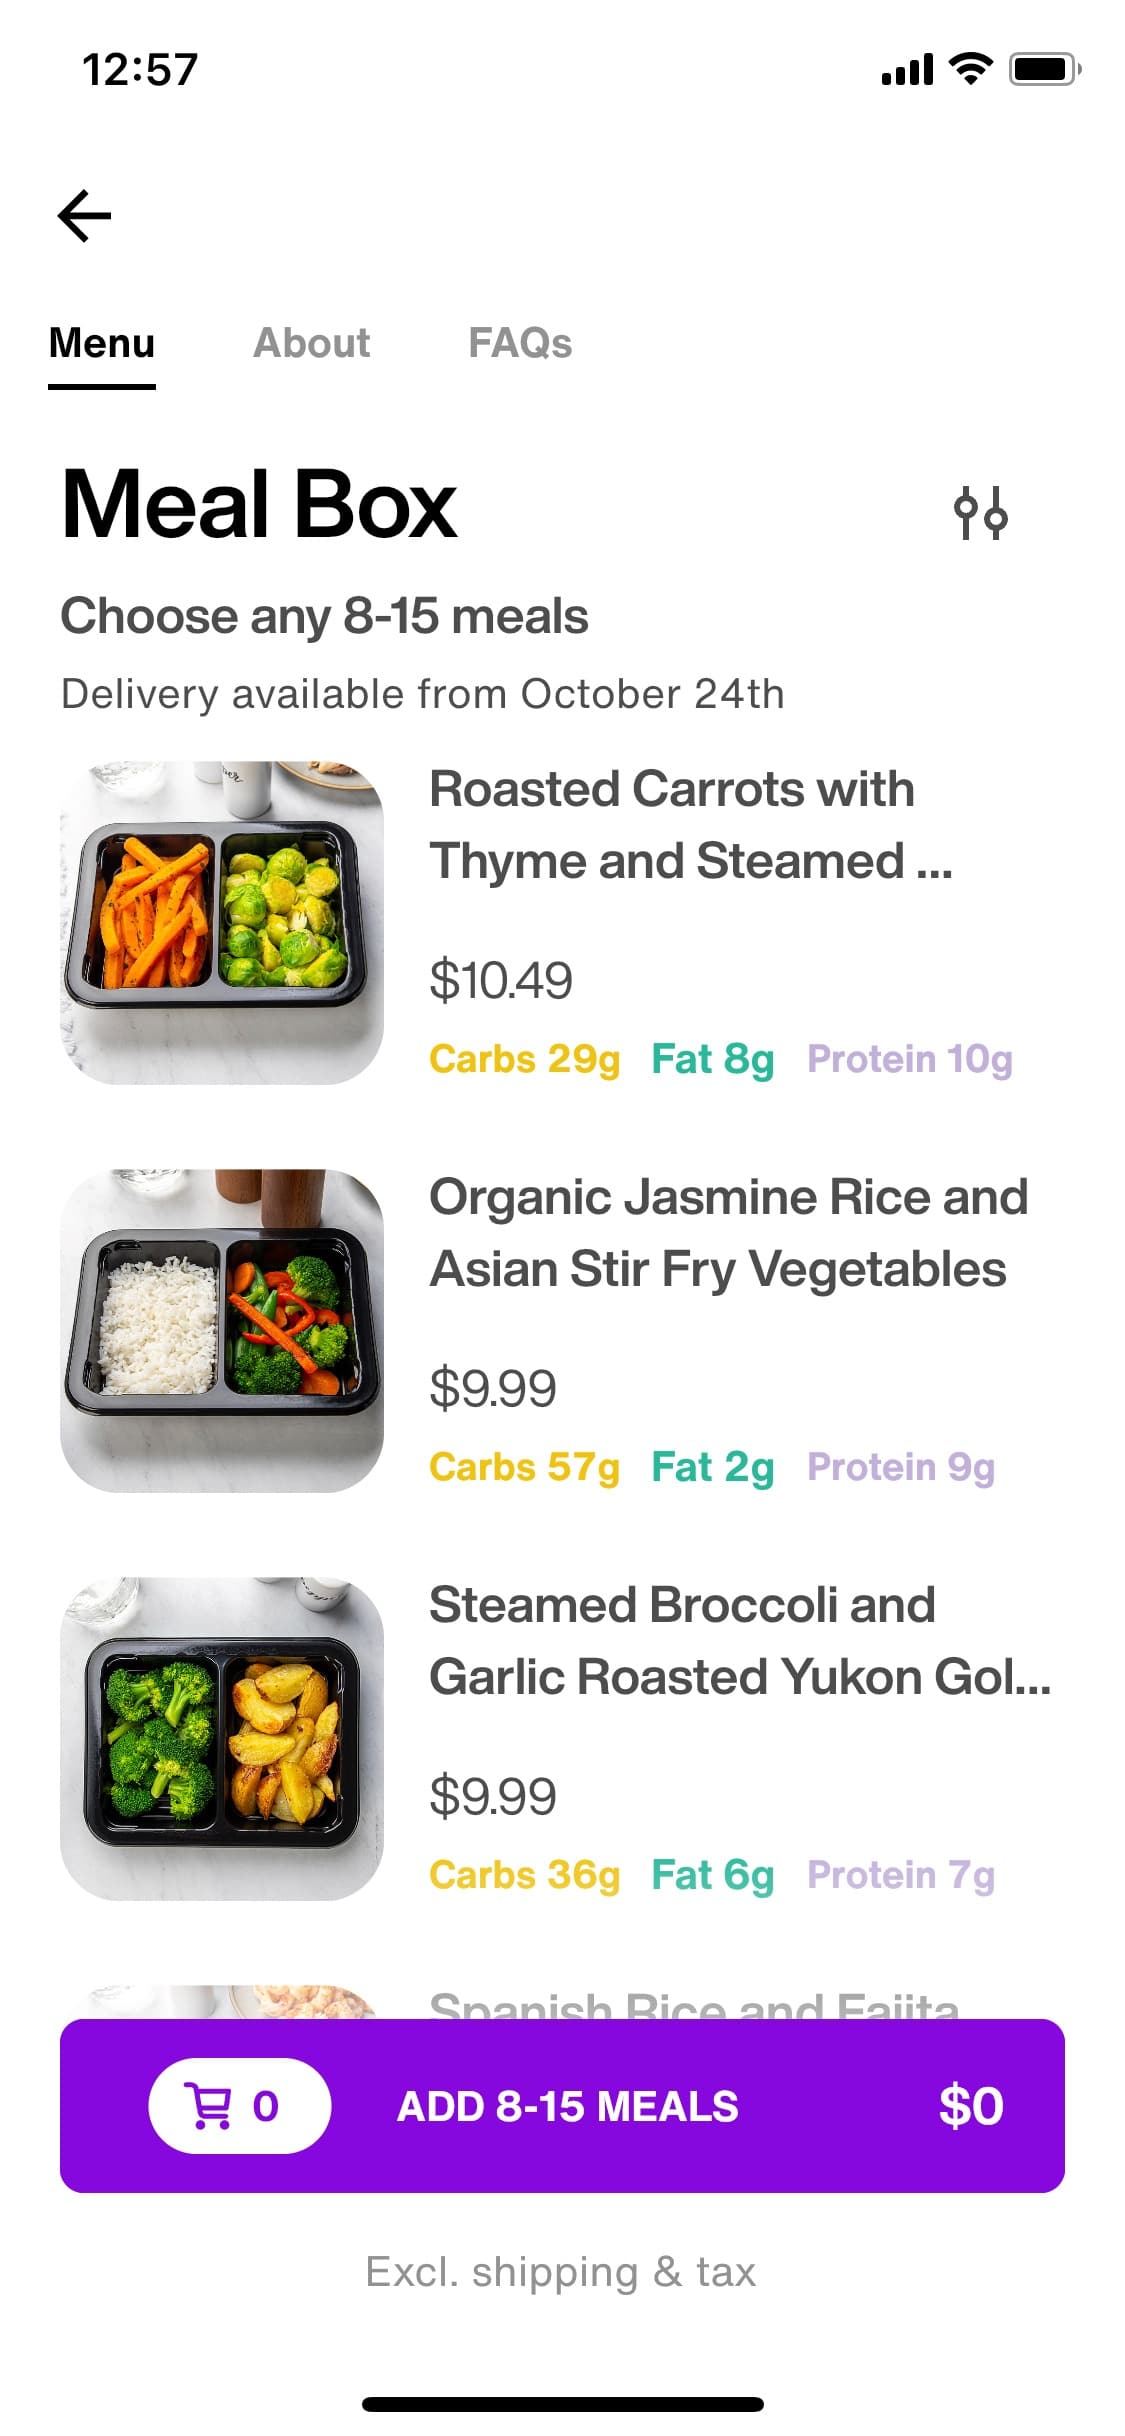 screenshot of Lumen meal plan options with carb count, fat and protein grams